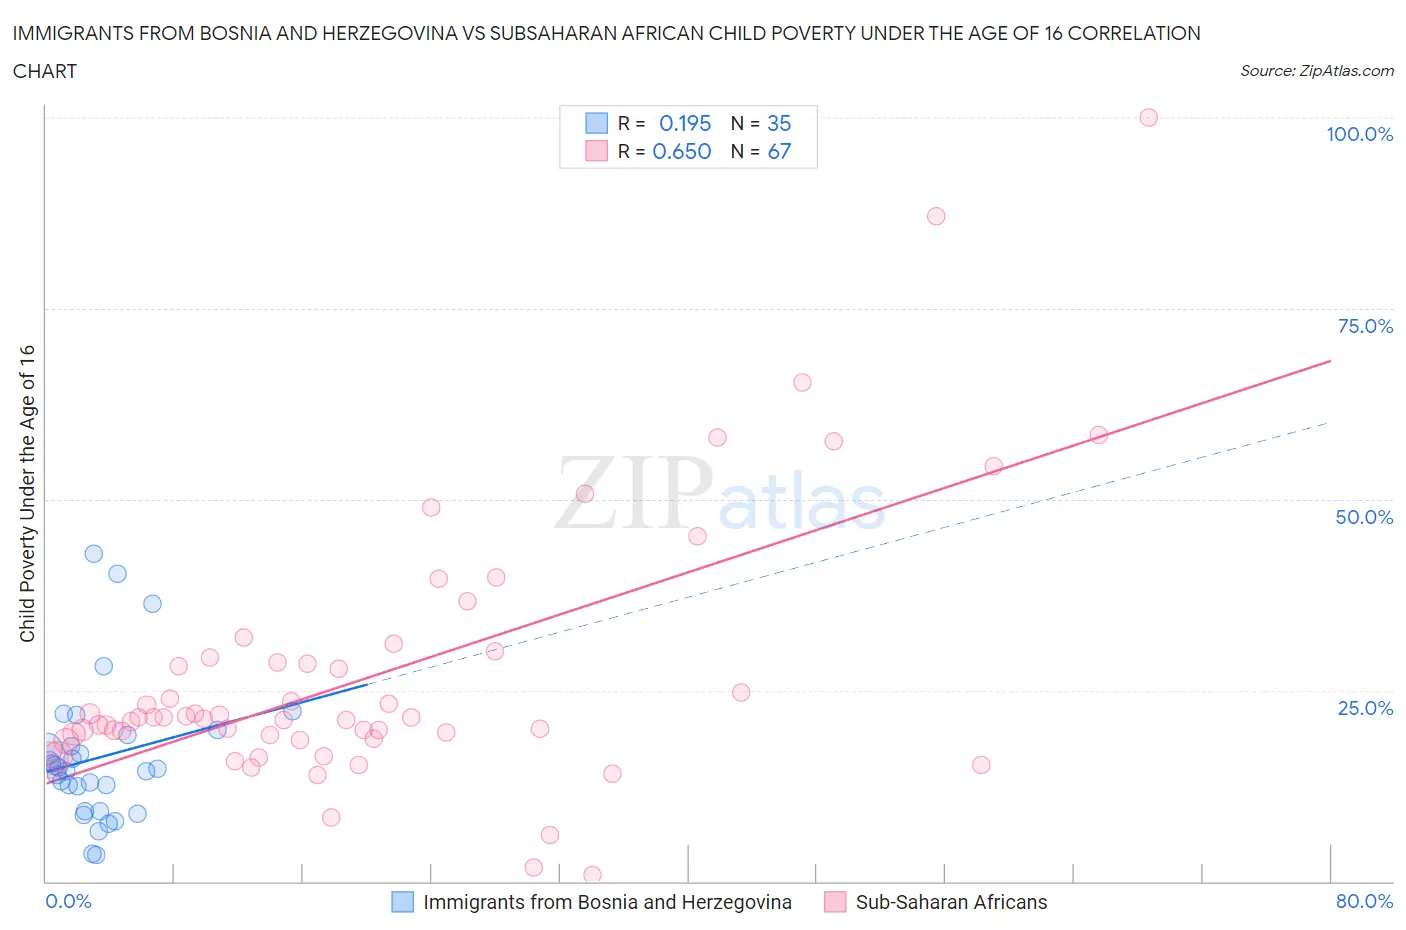 Immigrants from Bosnia and Herzegovina vs Subsaharan African Child Poverty Under the Age of 16